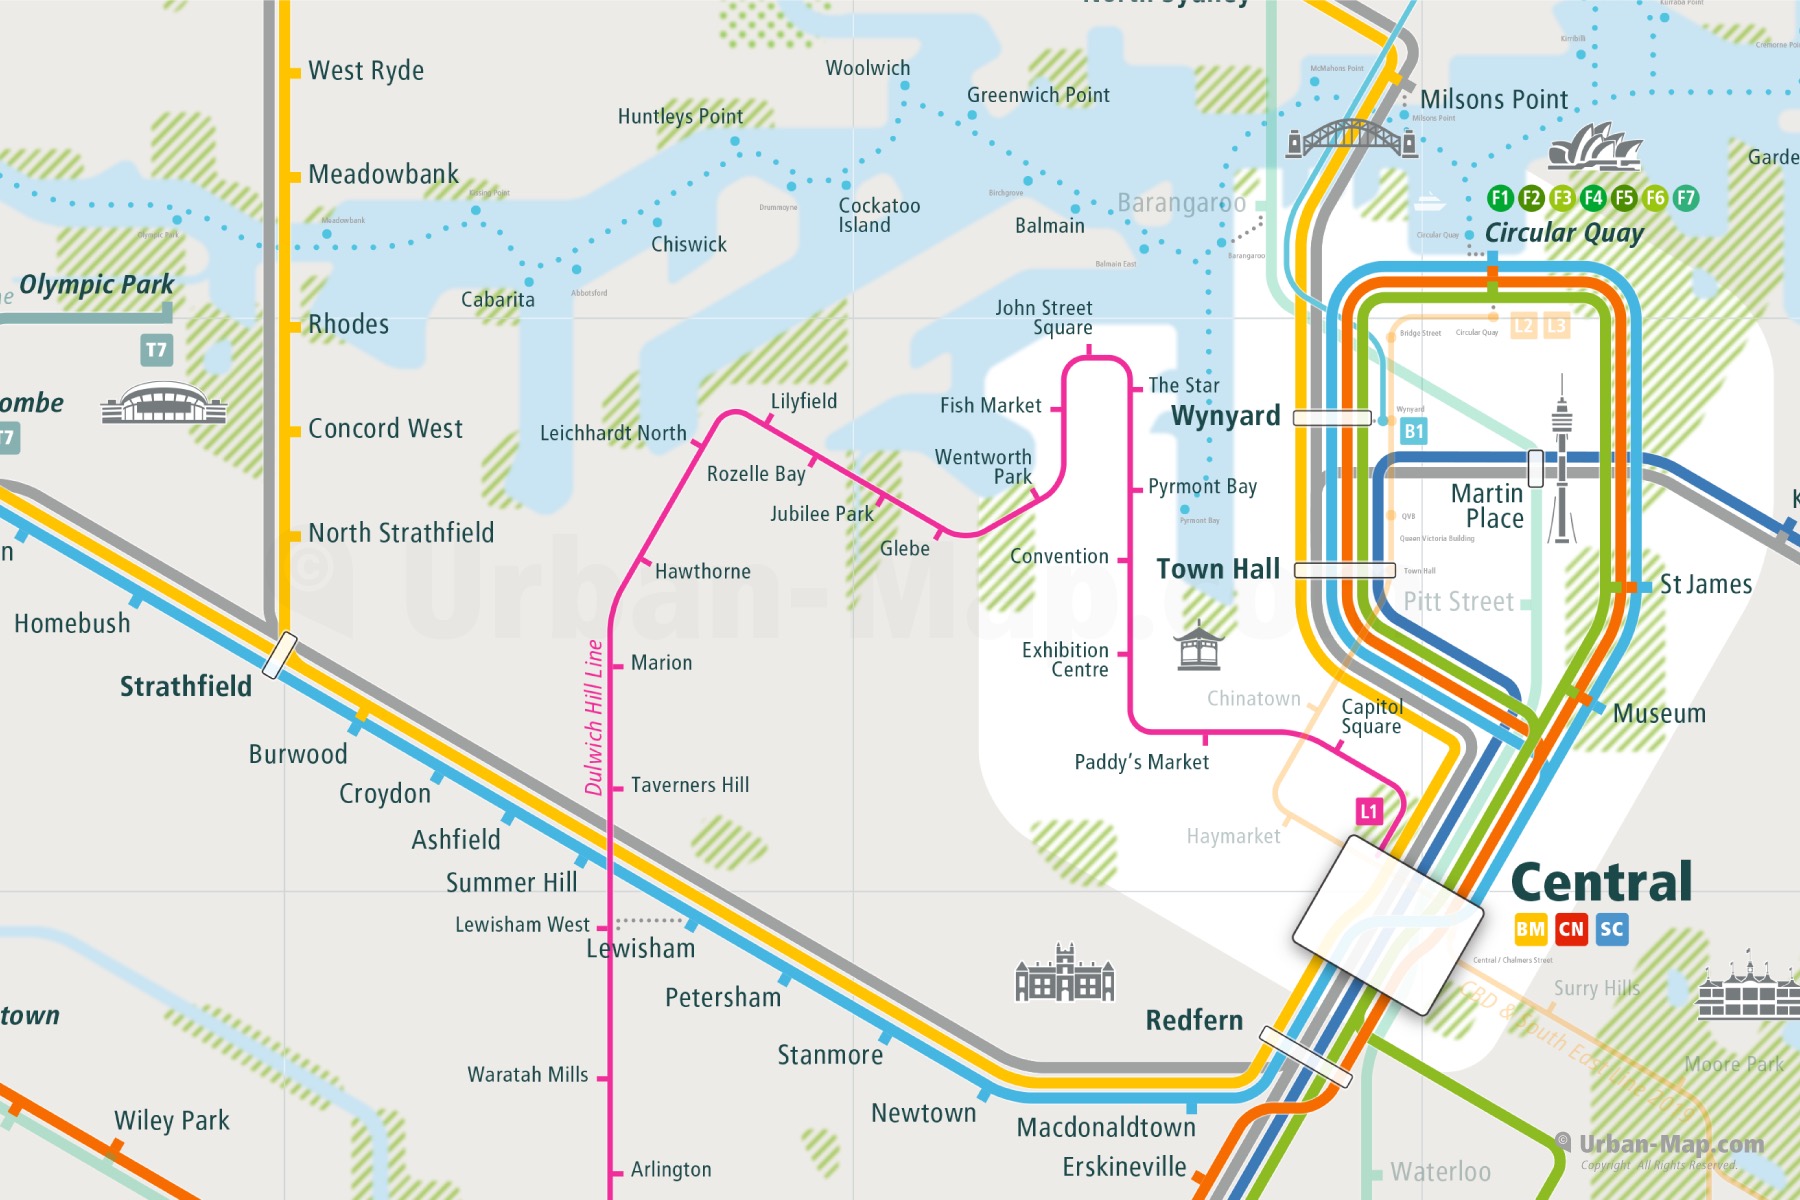 Sydney City Rail Map shows the train and public transportation routes of metro, BRT bus rapid transport, airport link, Ferry, Dulwich Hill line, Commuter train in New South Wales